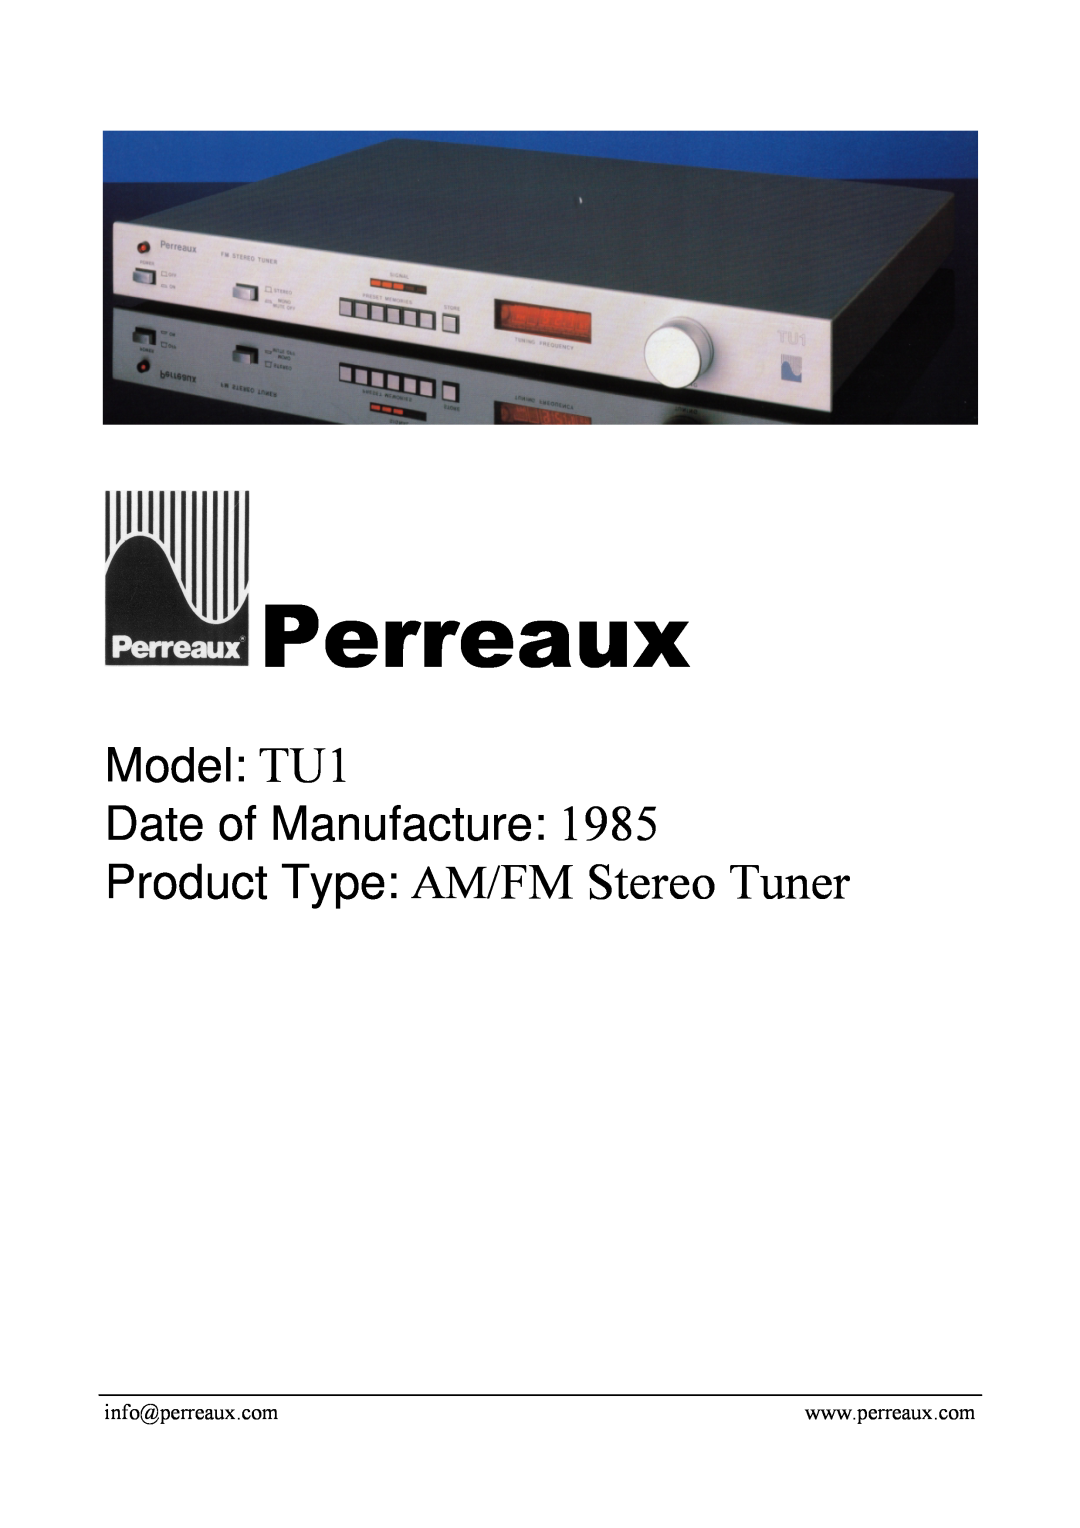 Perreaux manual Perreaux, Product Type AM/FM Stereo Tuner, Model TU1 Date of Manufacture 